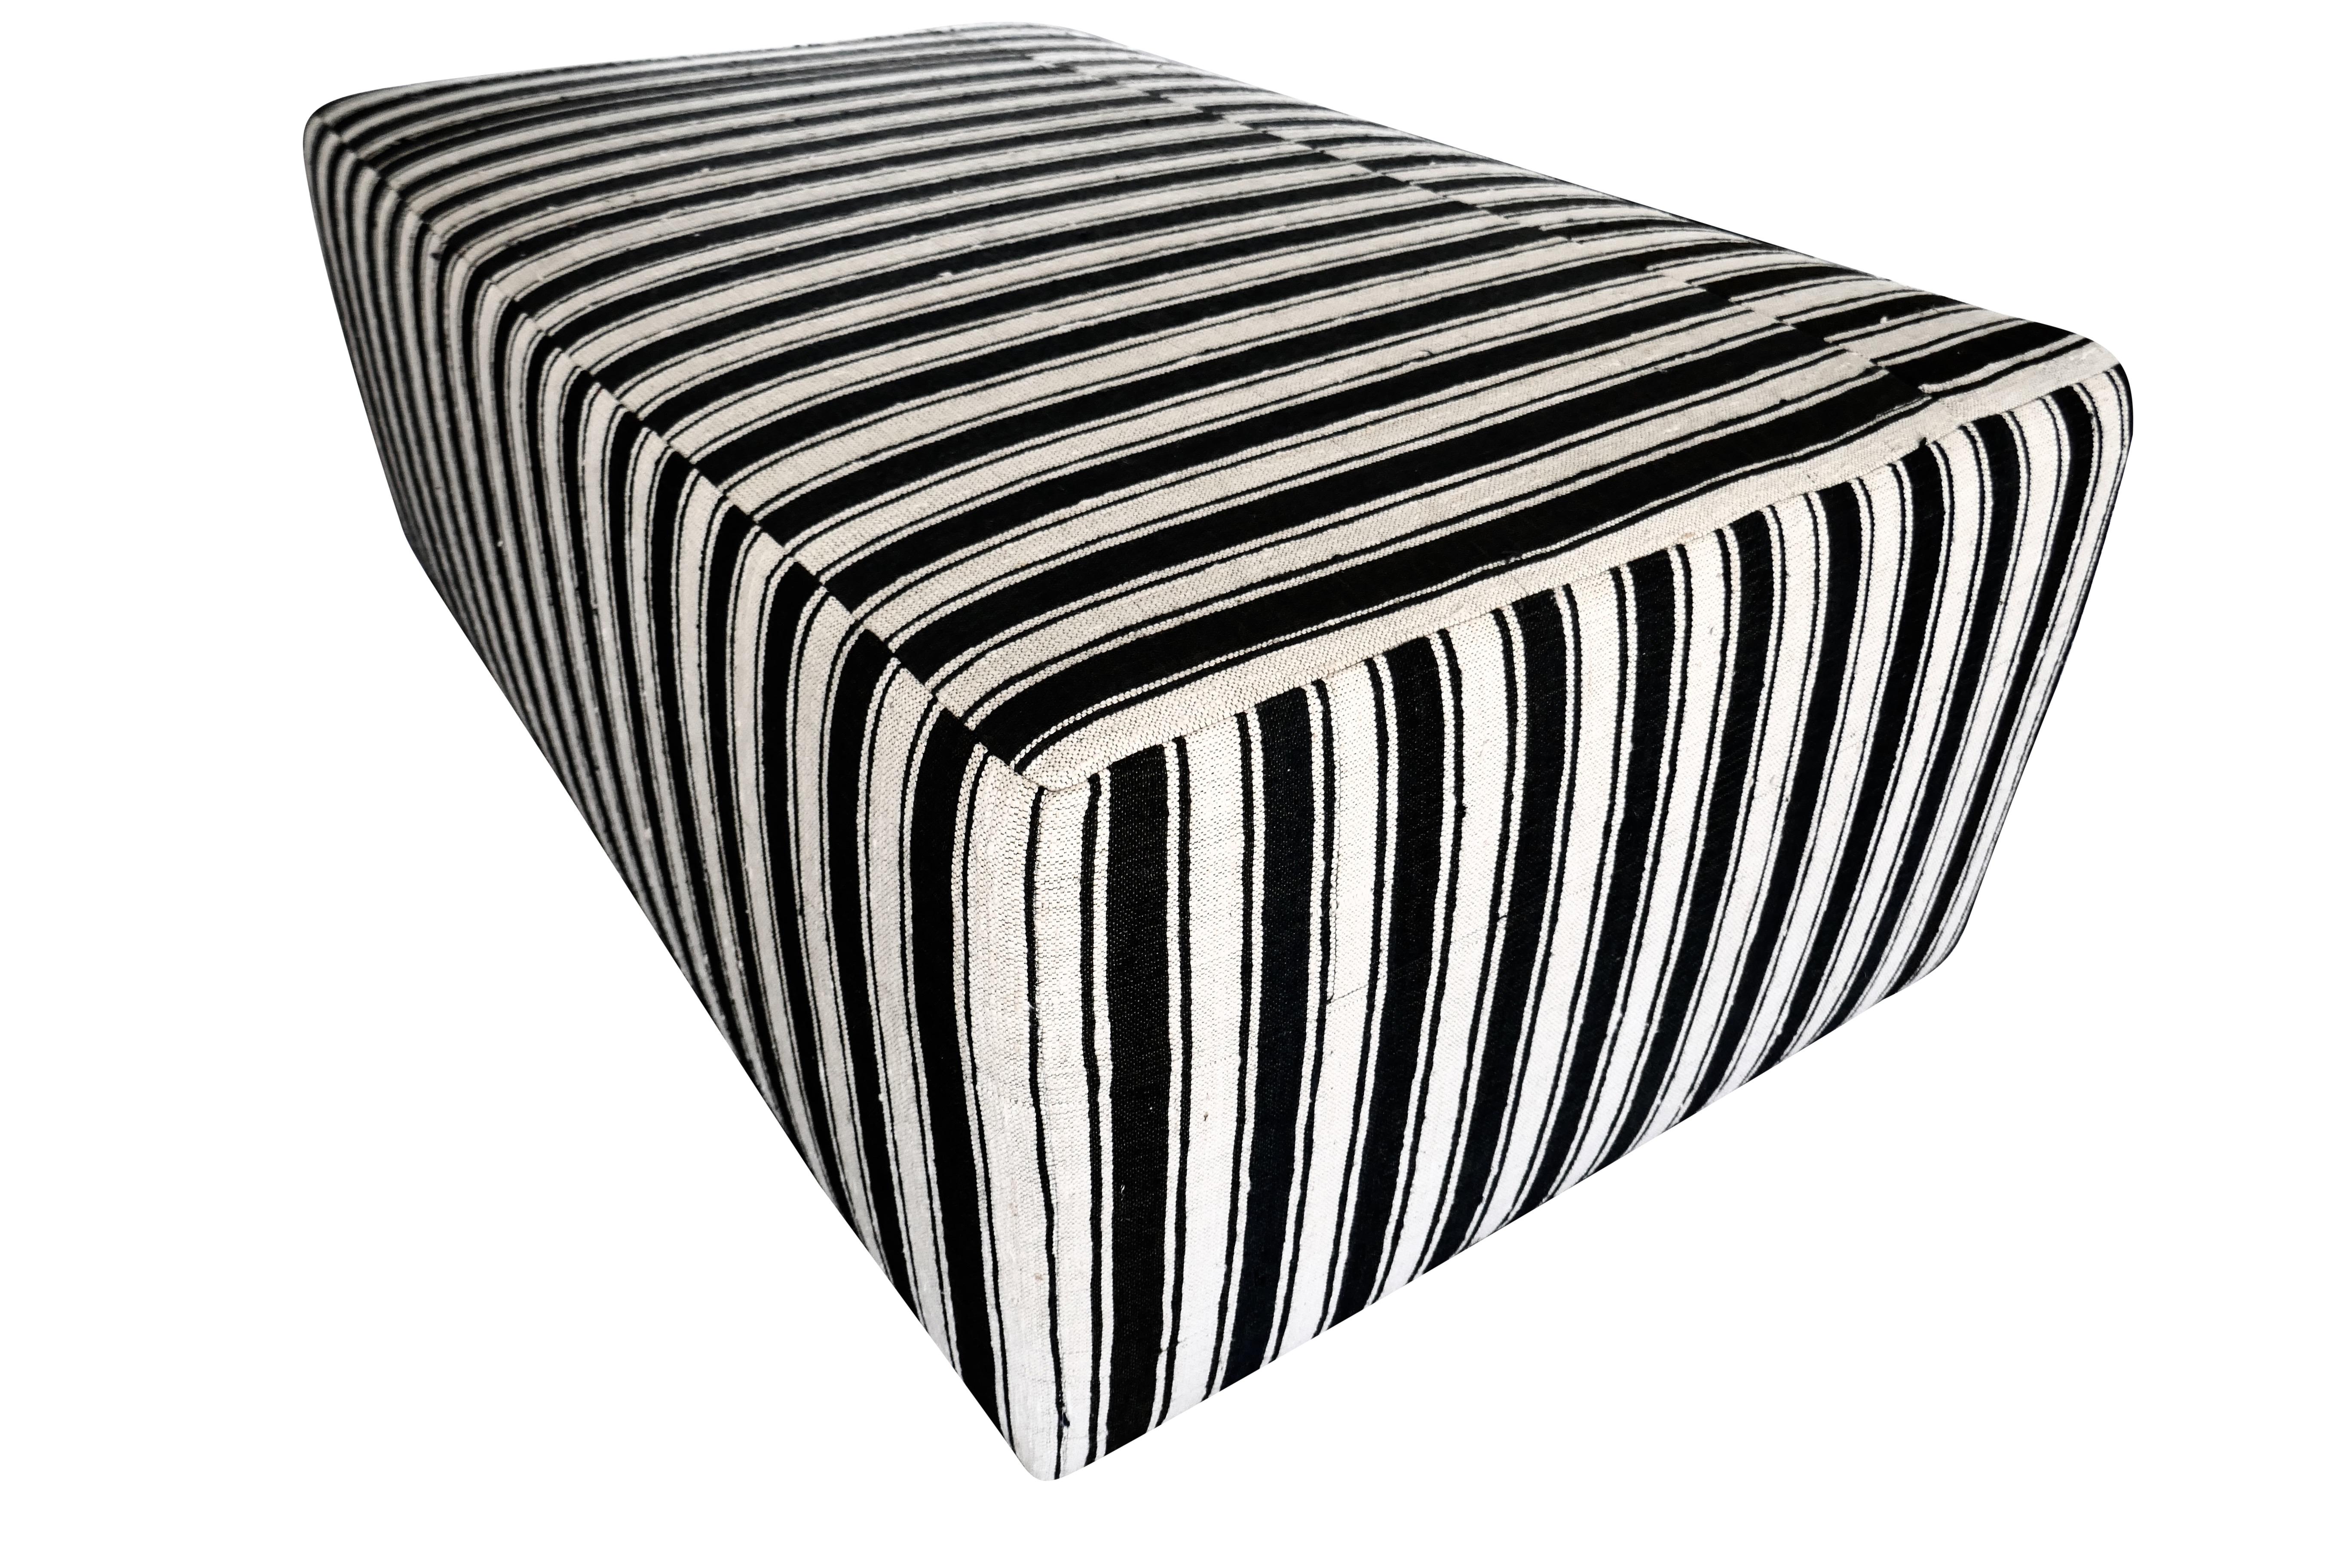 FI custom large cocktail ottoman, perfectly upholstered in beautiful authentic vintage hand-woven heavy textural Berber Kilim organic black & natural stripe wool textile. Fully cushioned with all soft edges and corners, solid wood inner-frame.